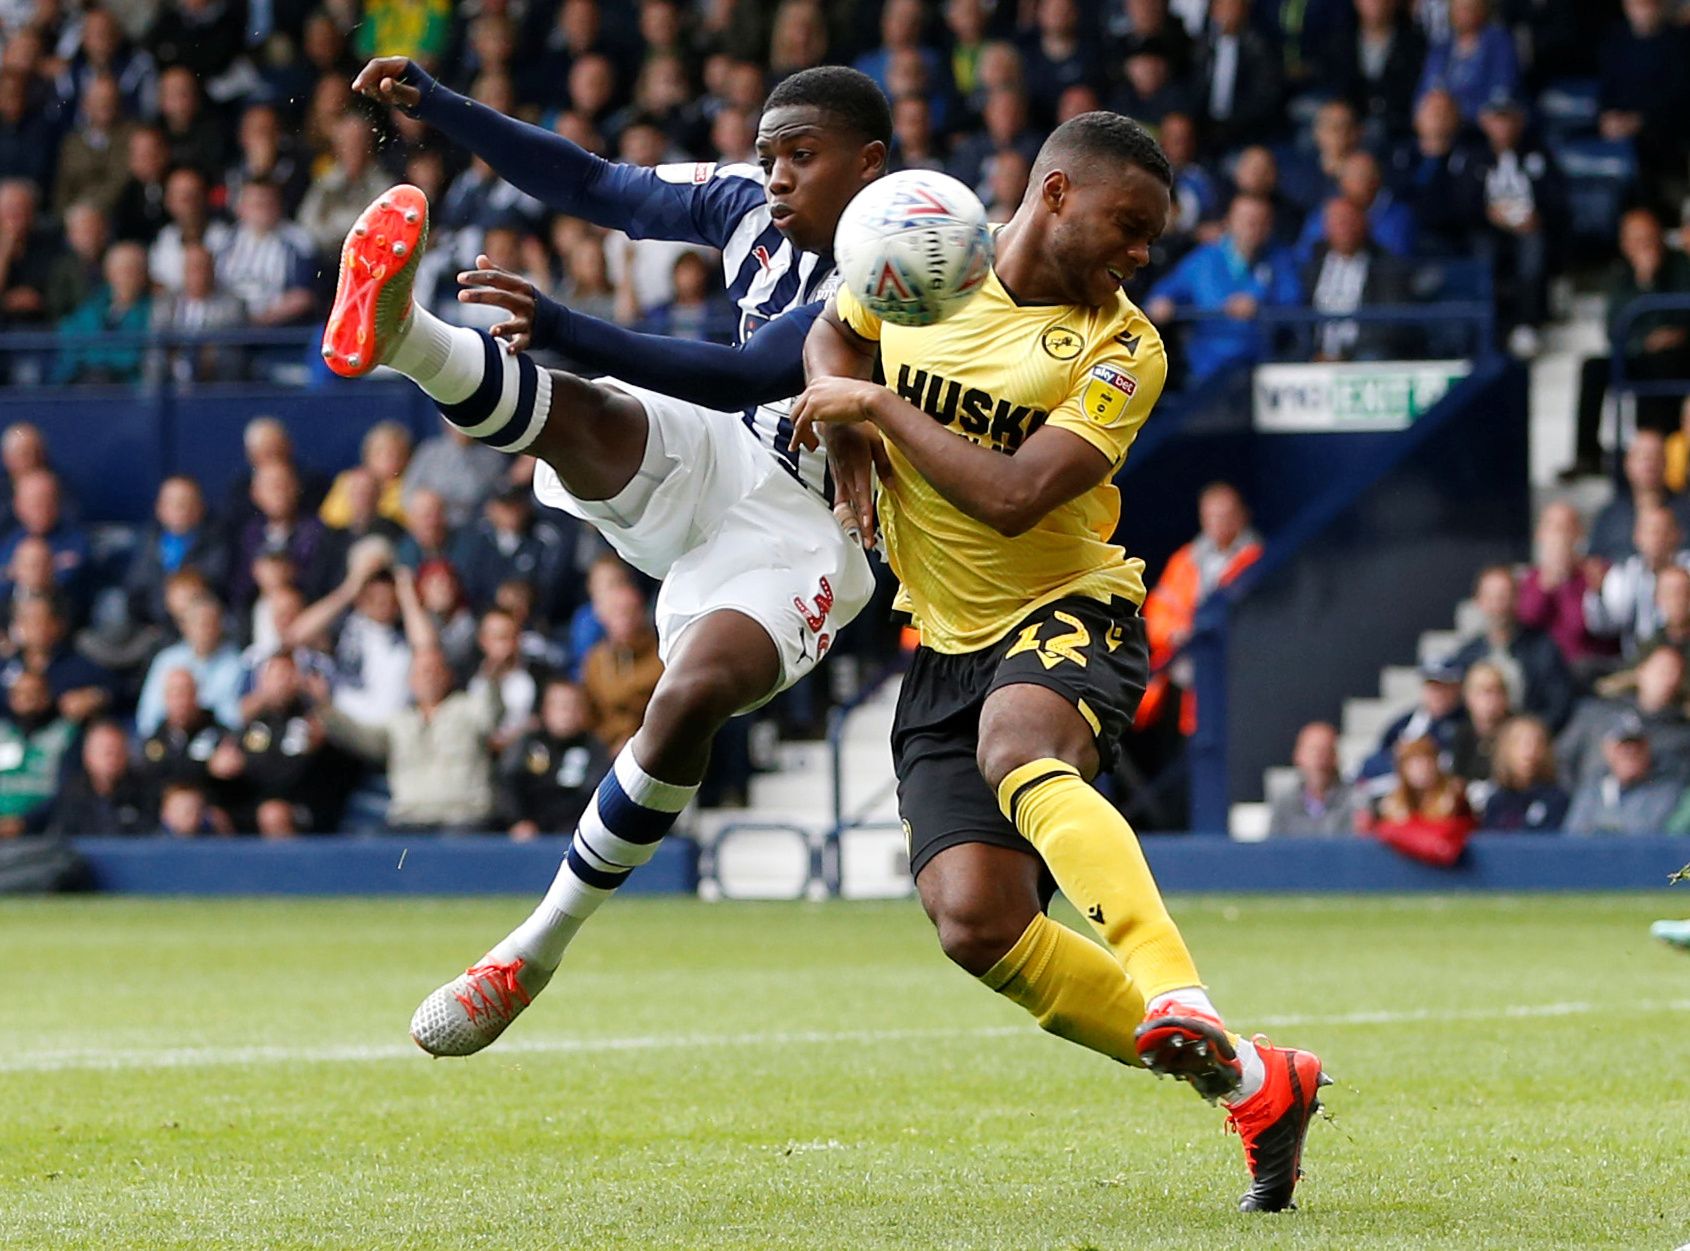 Soccer Football - Championship - West Bromwich Albion v Millwall - The Hawthorns, West Bromwich, Britain - August 10, 2019  Millwall's Mahlon Romeo sustains an injury whilst in action with West Bromwich Albion's Nathan Ferguson   Action Images/Ed Sykes  EDITORIAL USE ONLY. No use with unauthorized audio, video, data, fixture lists, club/league logos or 